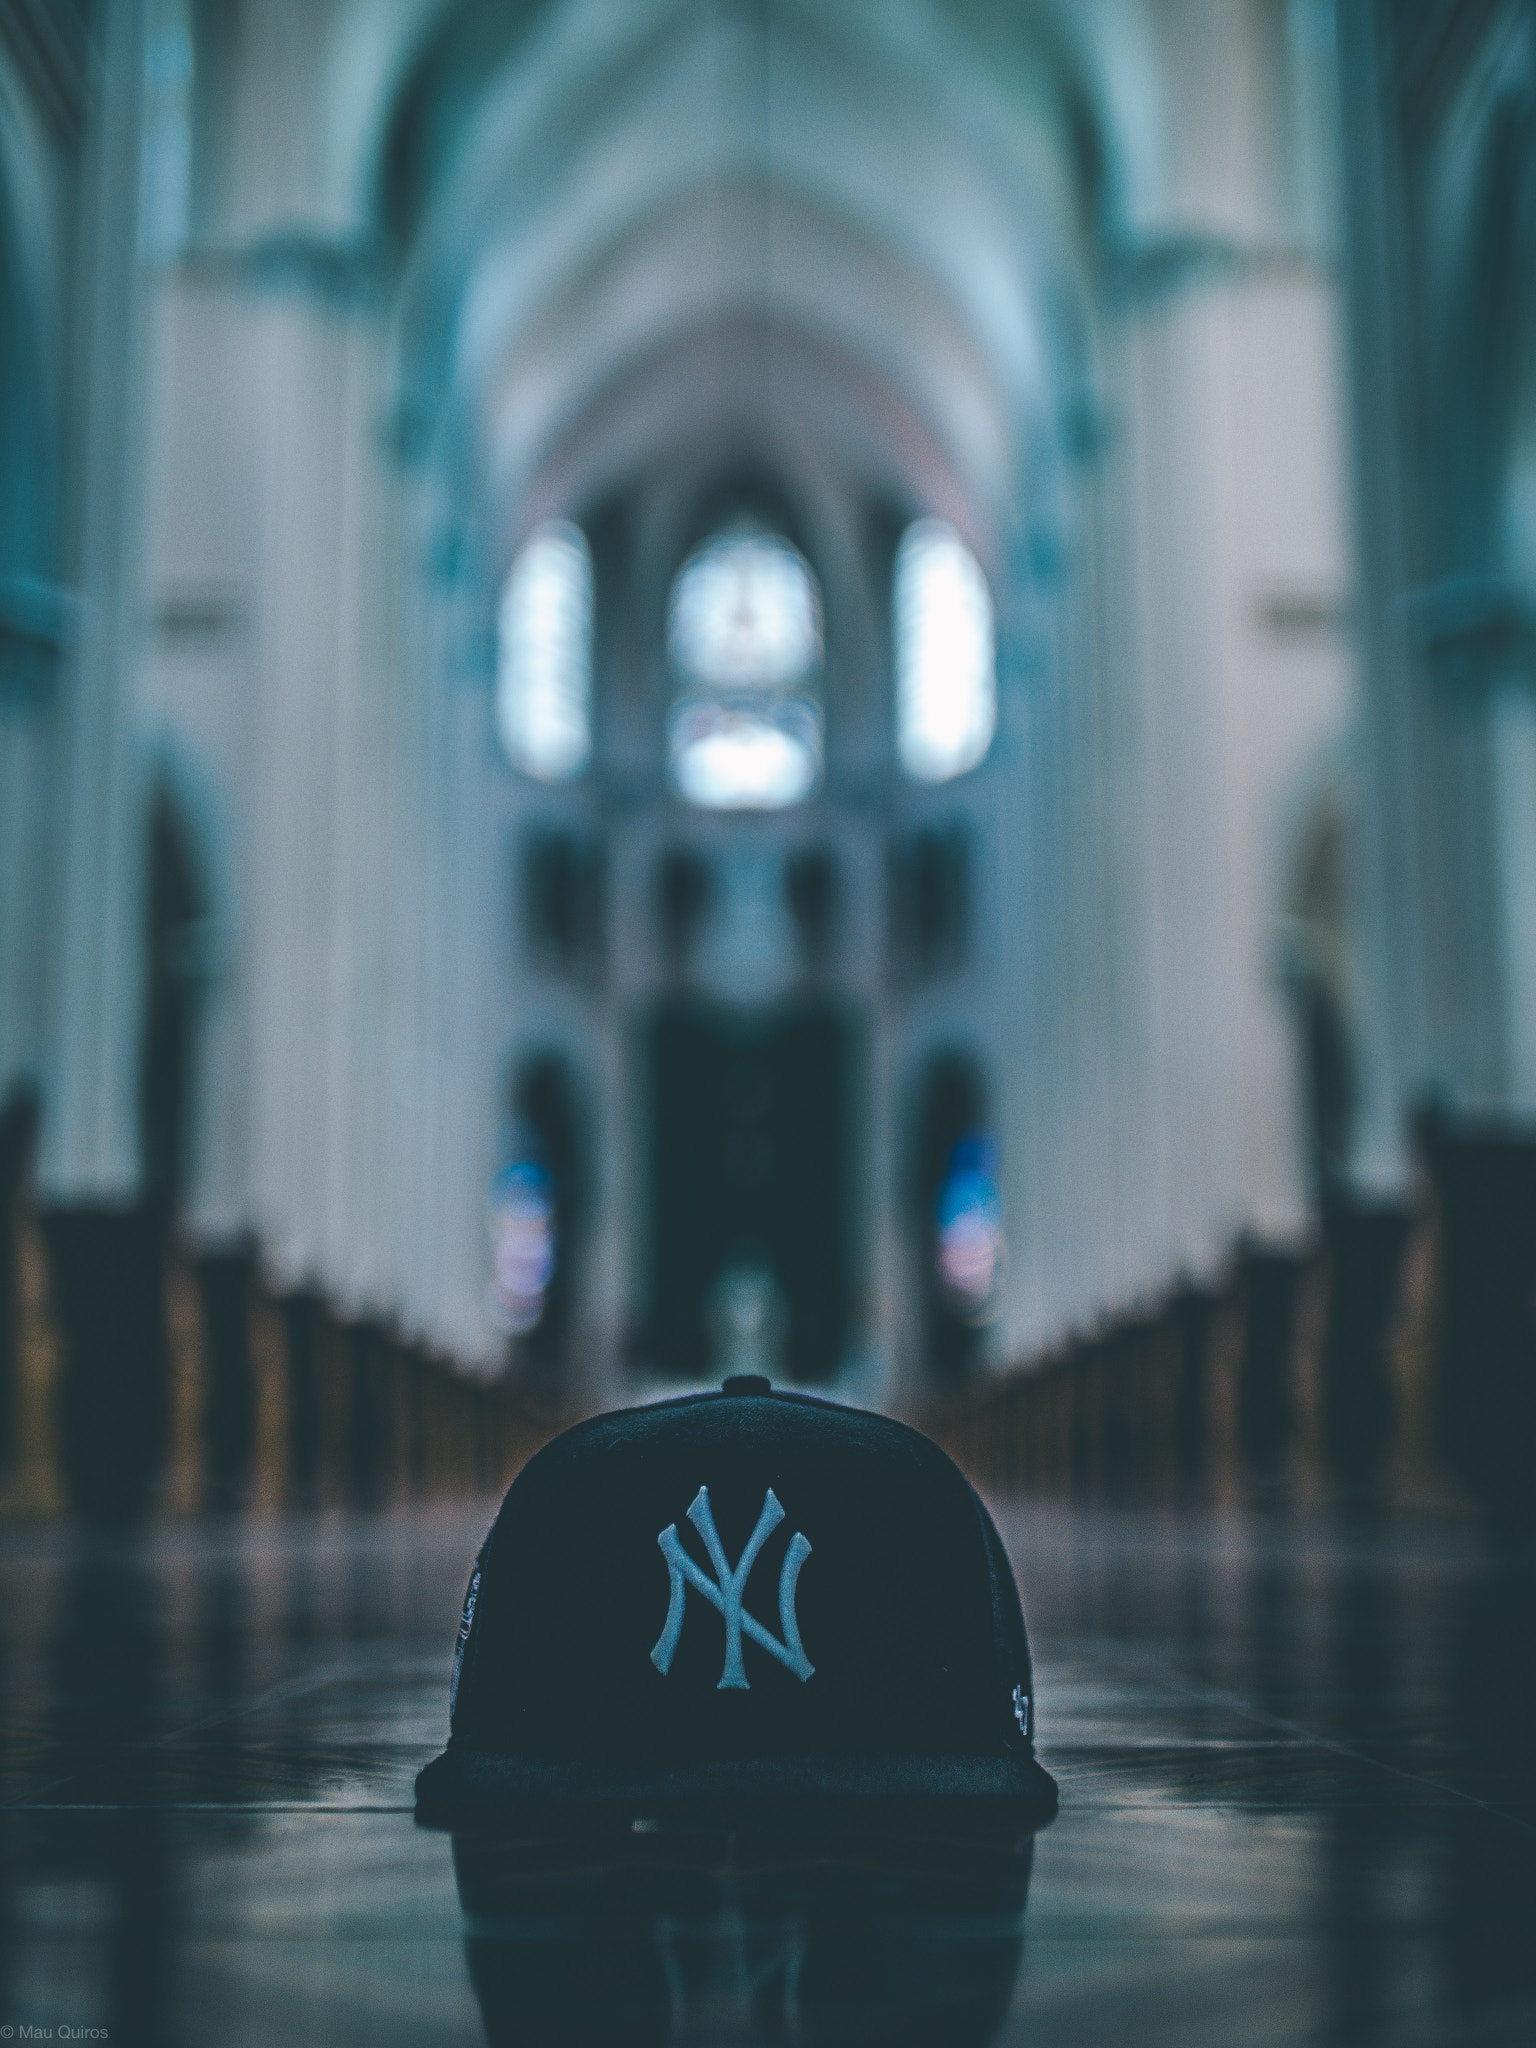 .7x Metabones 30/1.4 sample photo. "take your hat off, you are in church" photography